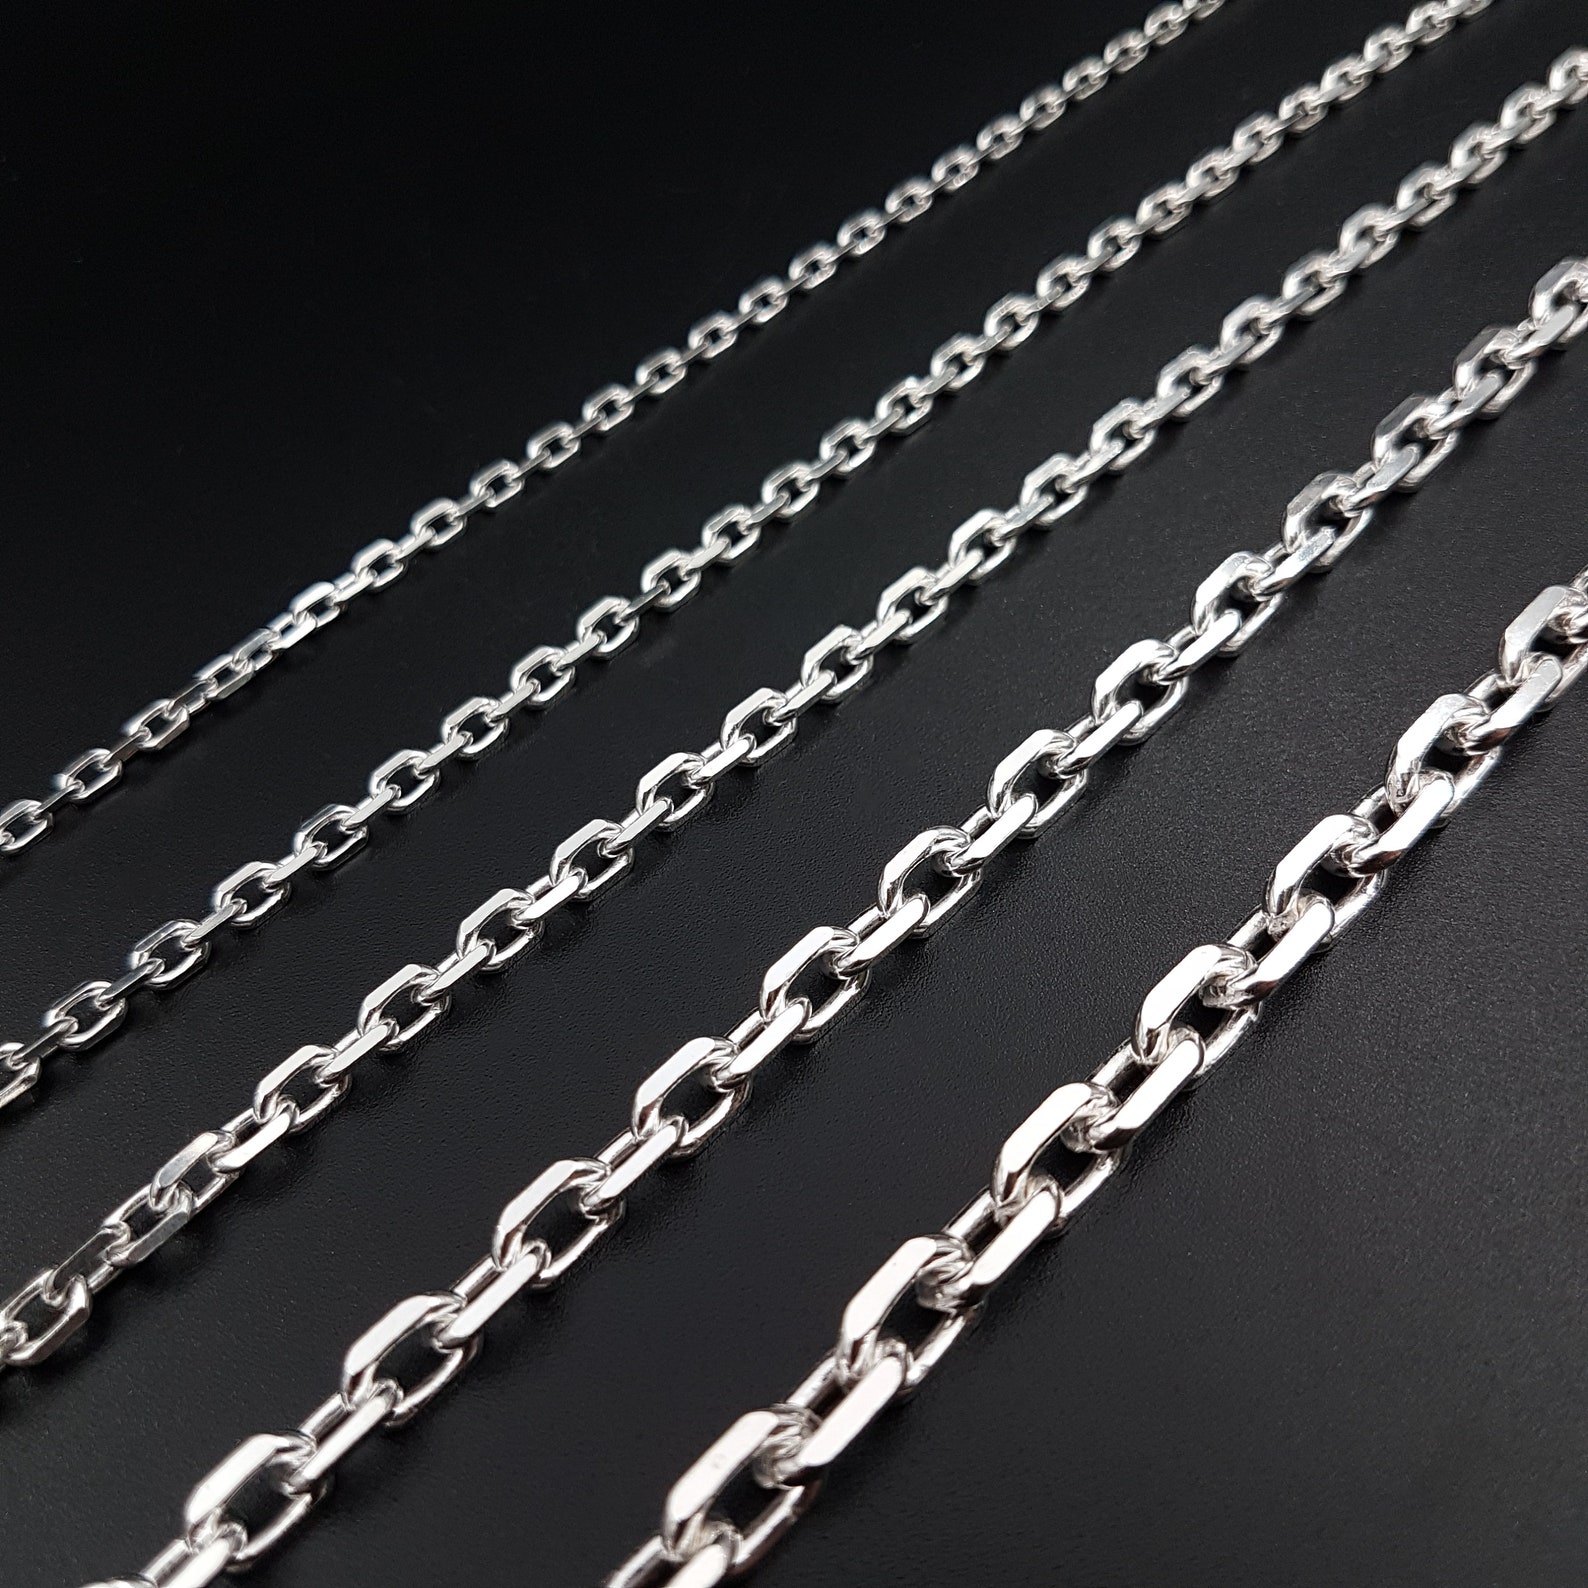 Italian Anchor Chain Necklace925 Sterling Silver Chain - Etsy